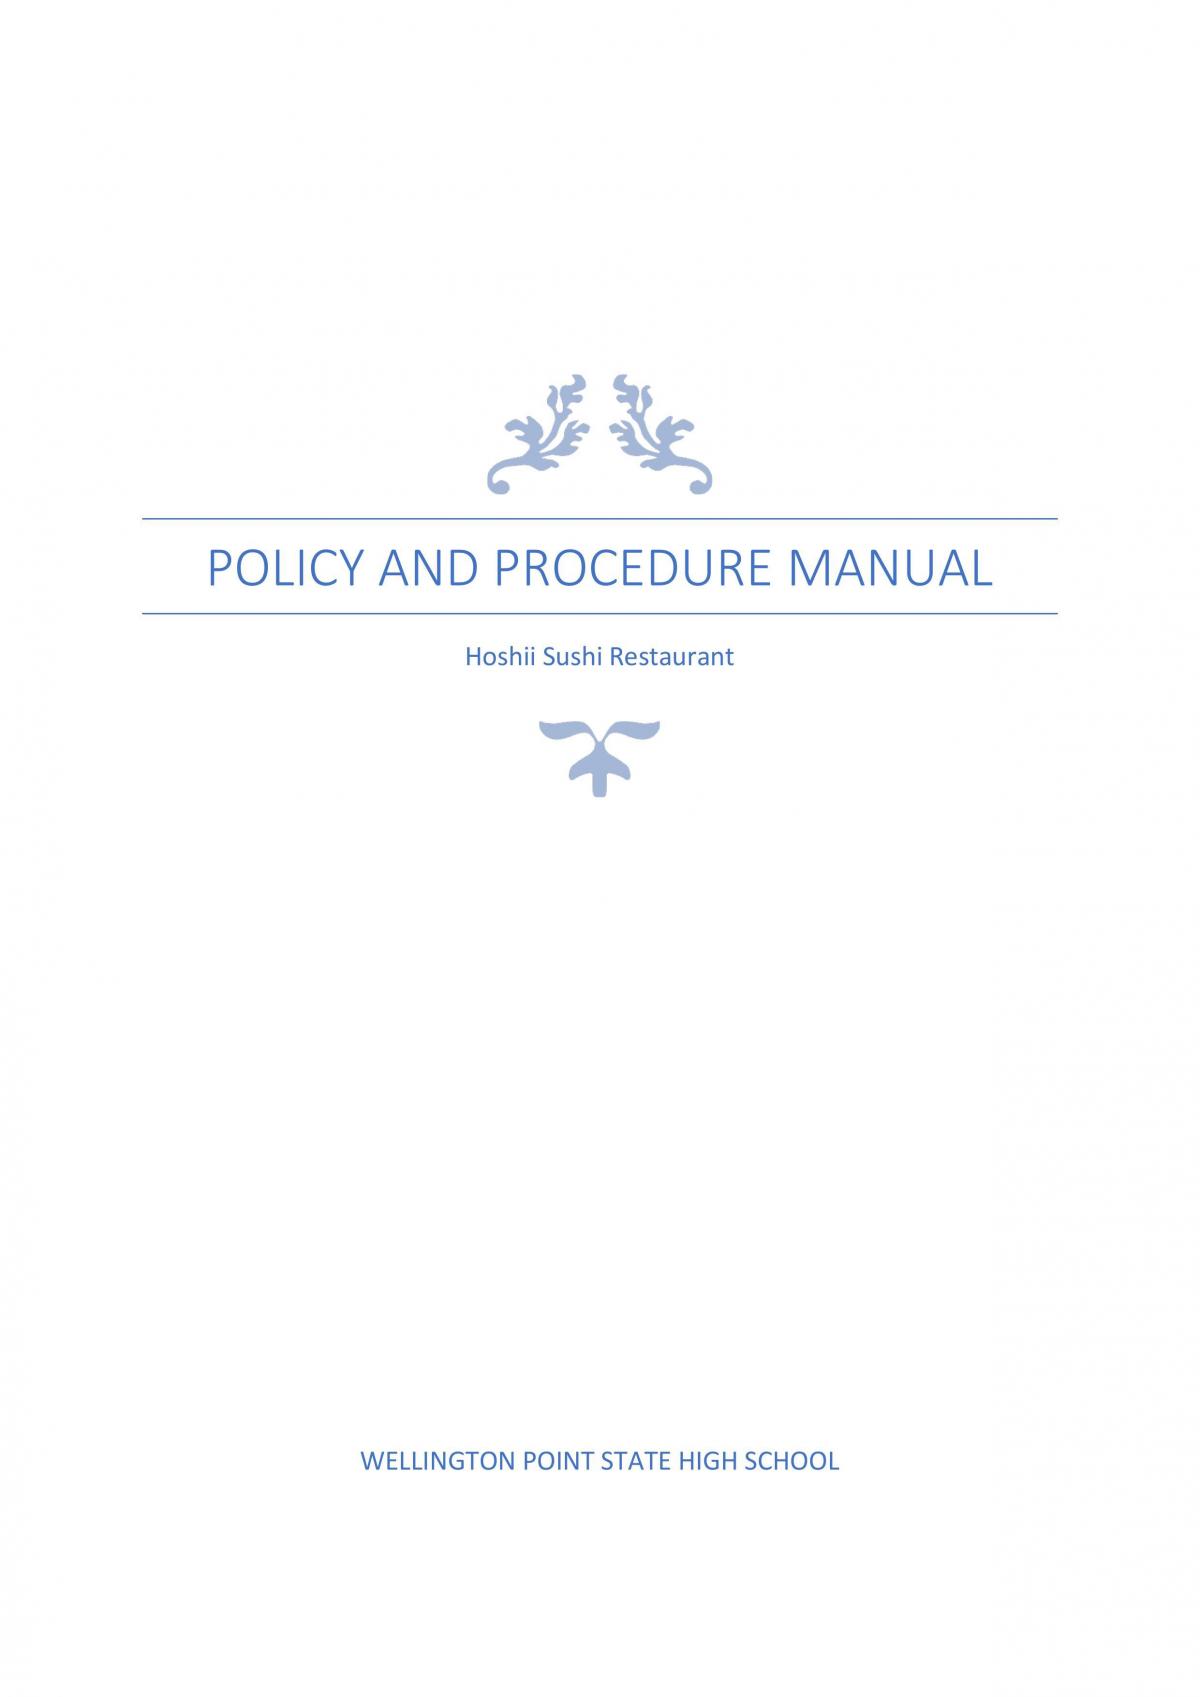 Policy and Procedure Manual for Sushi Restaurant - Page 1